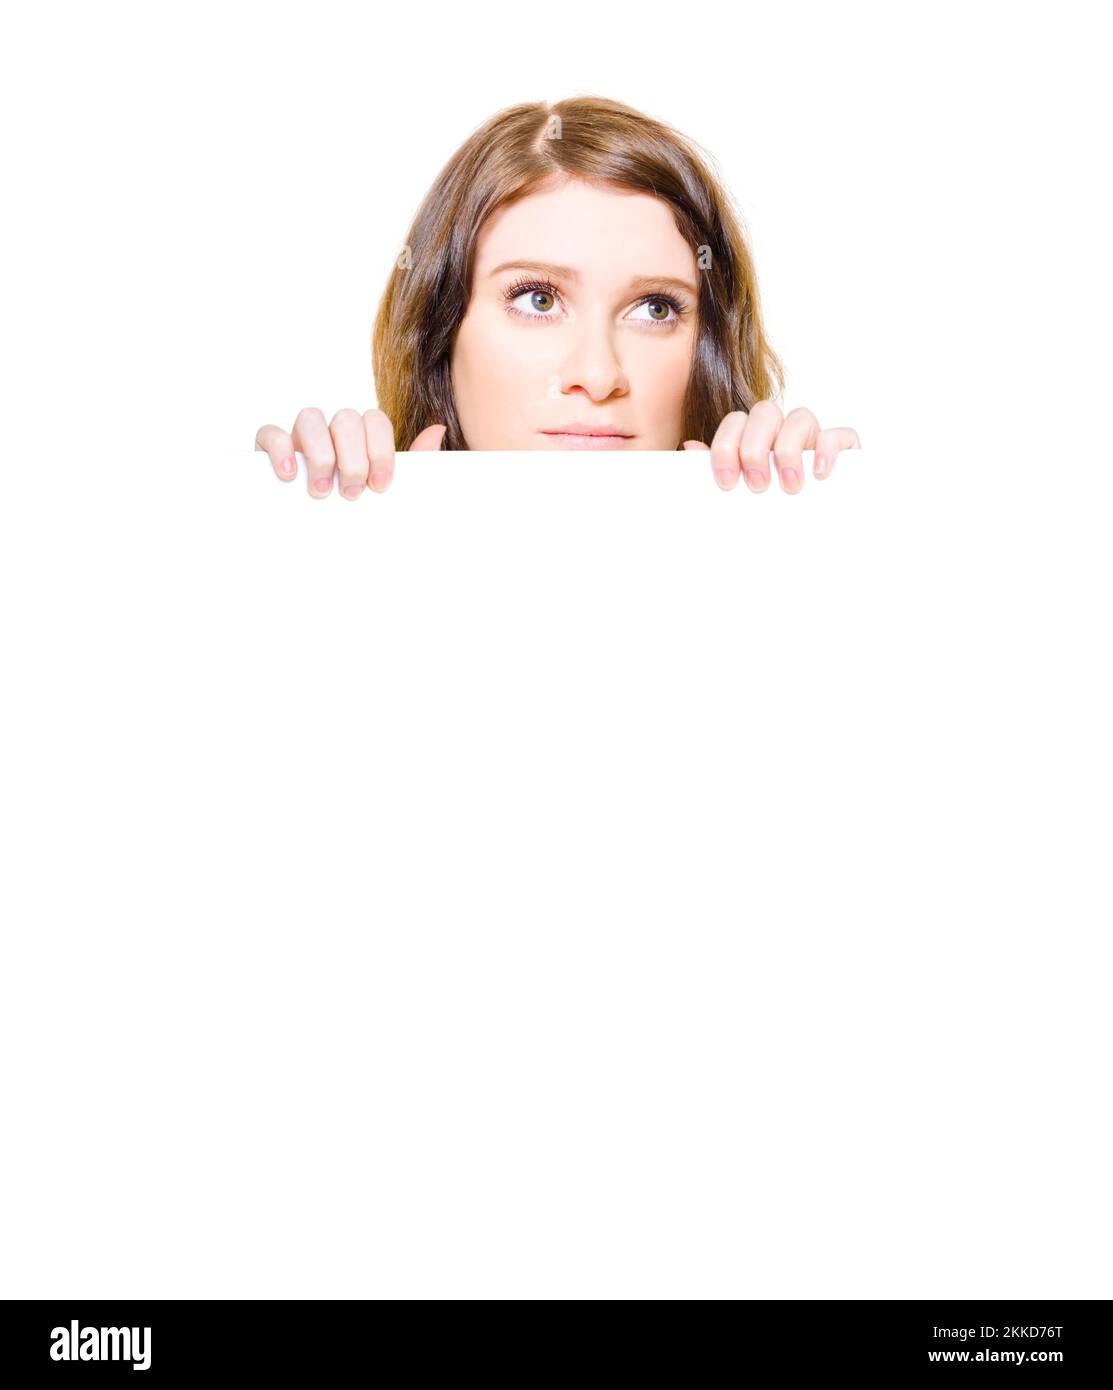 Isolated Image Of A Sad And Unhappy Woman With A Look Of Wanting, Yearning And Longing Holding A Large White Blank Sign Board In A Wish List Concept Stock Photo